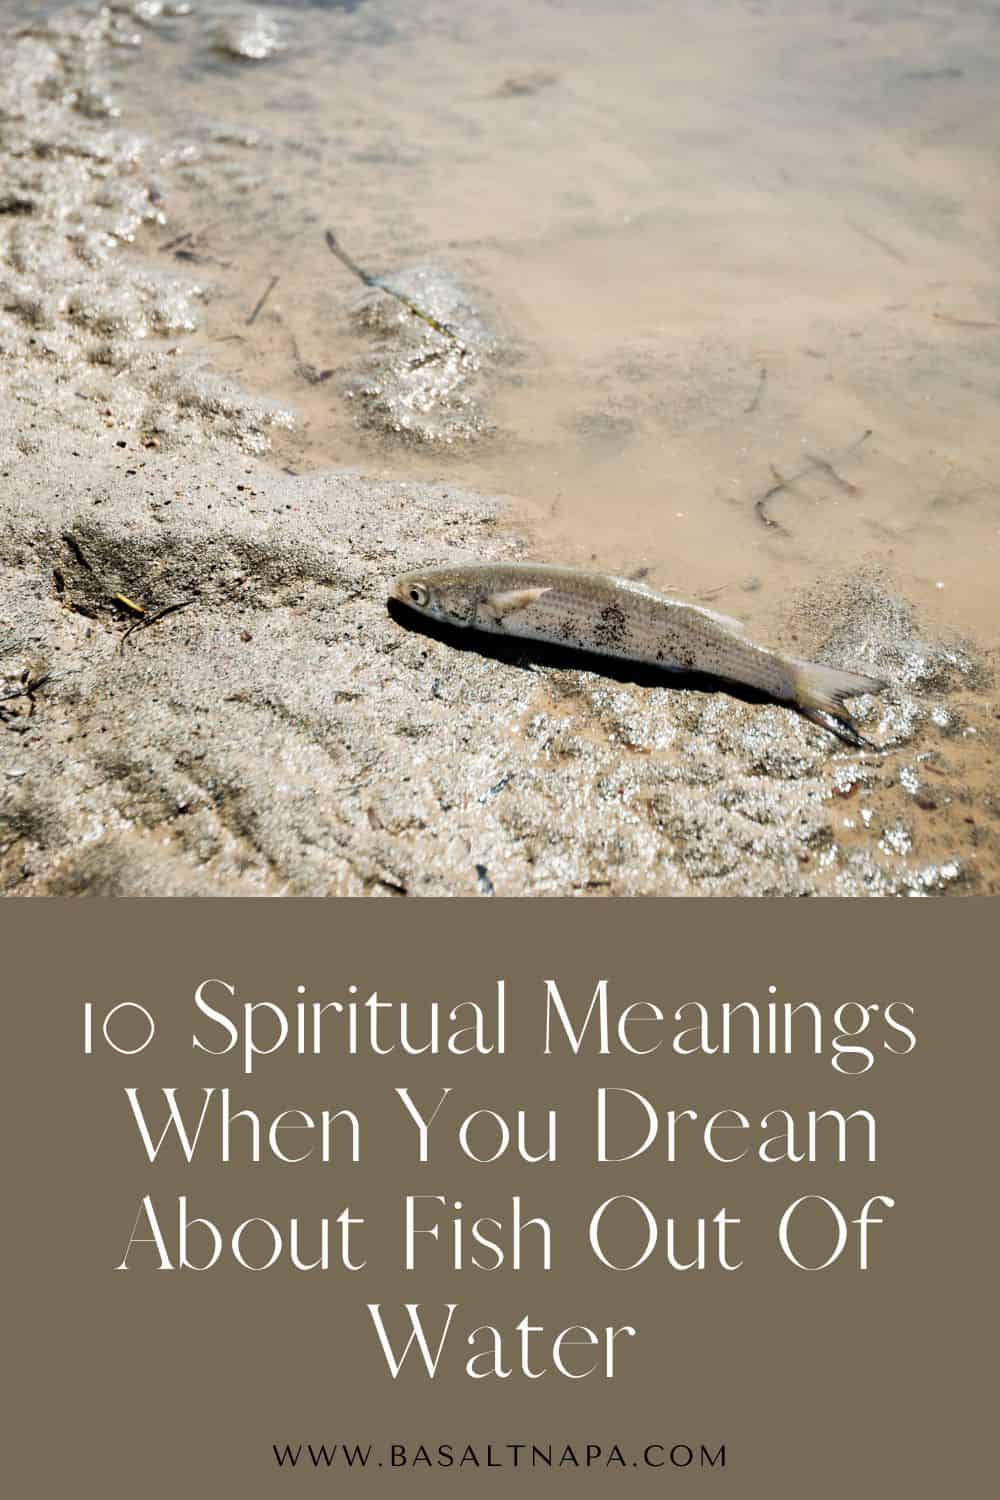 10 Spiritual Meanings When You Dream About Fish Out Of Water